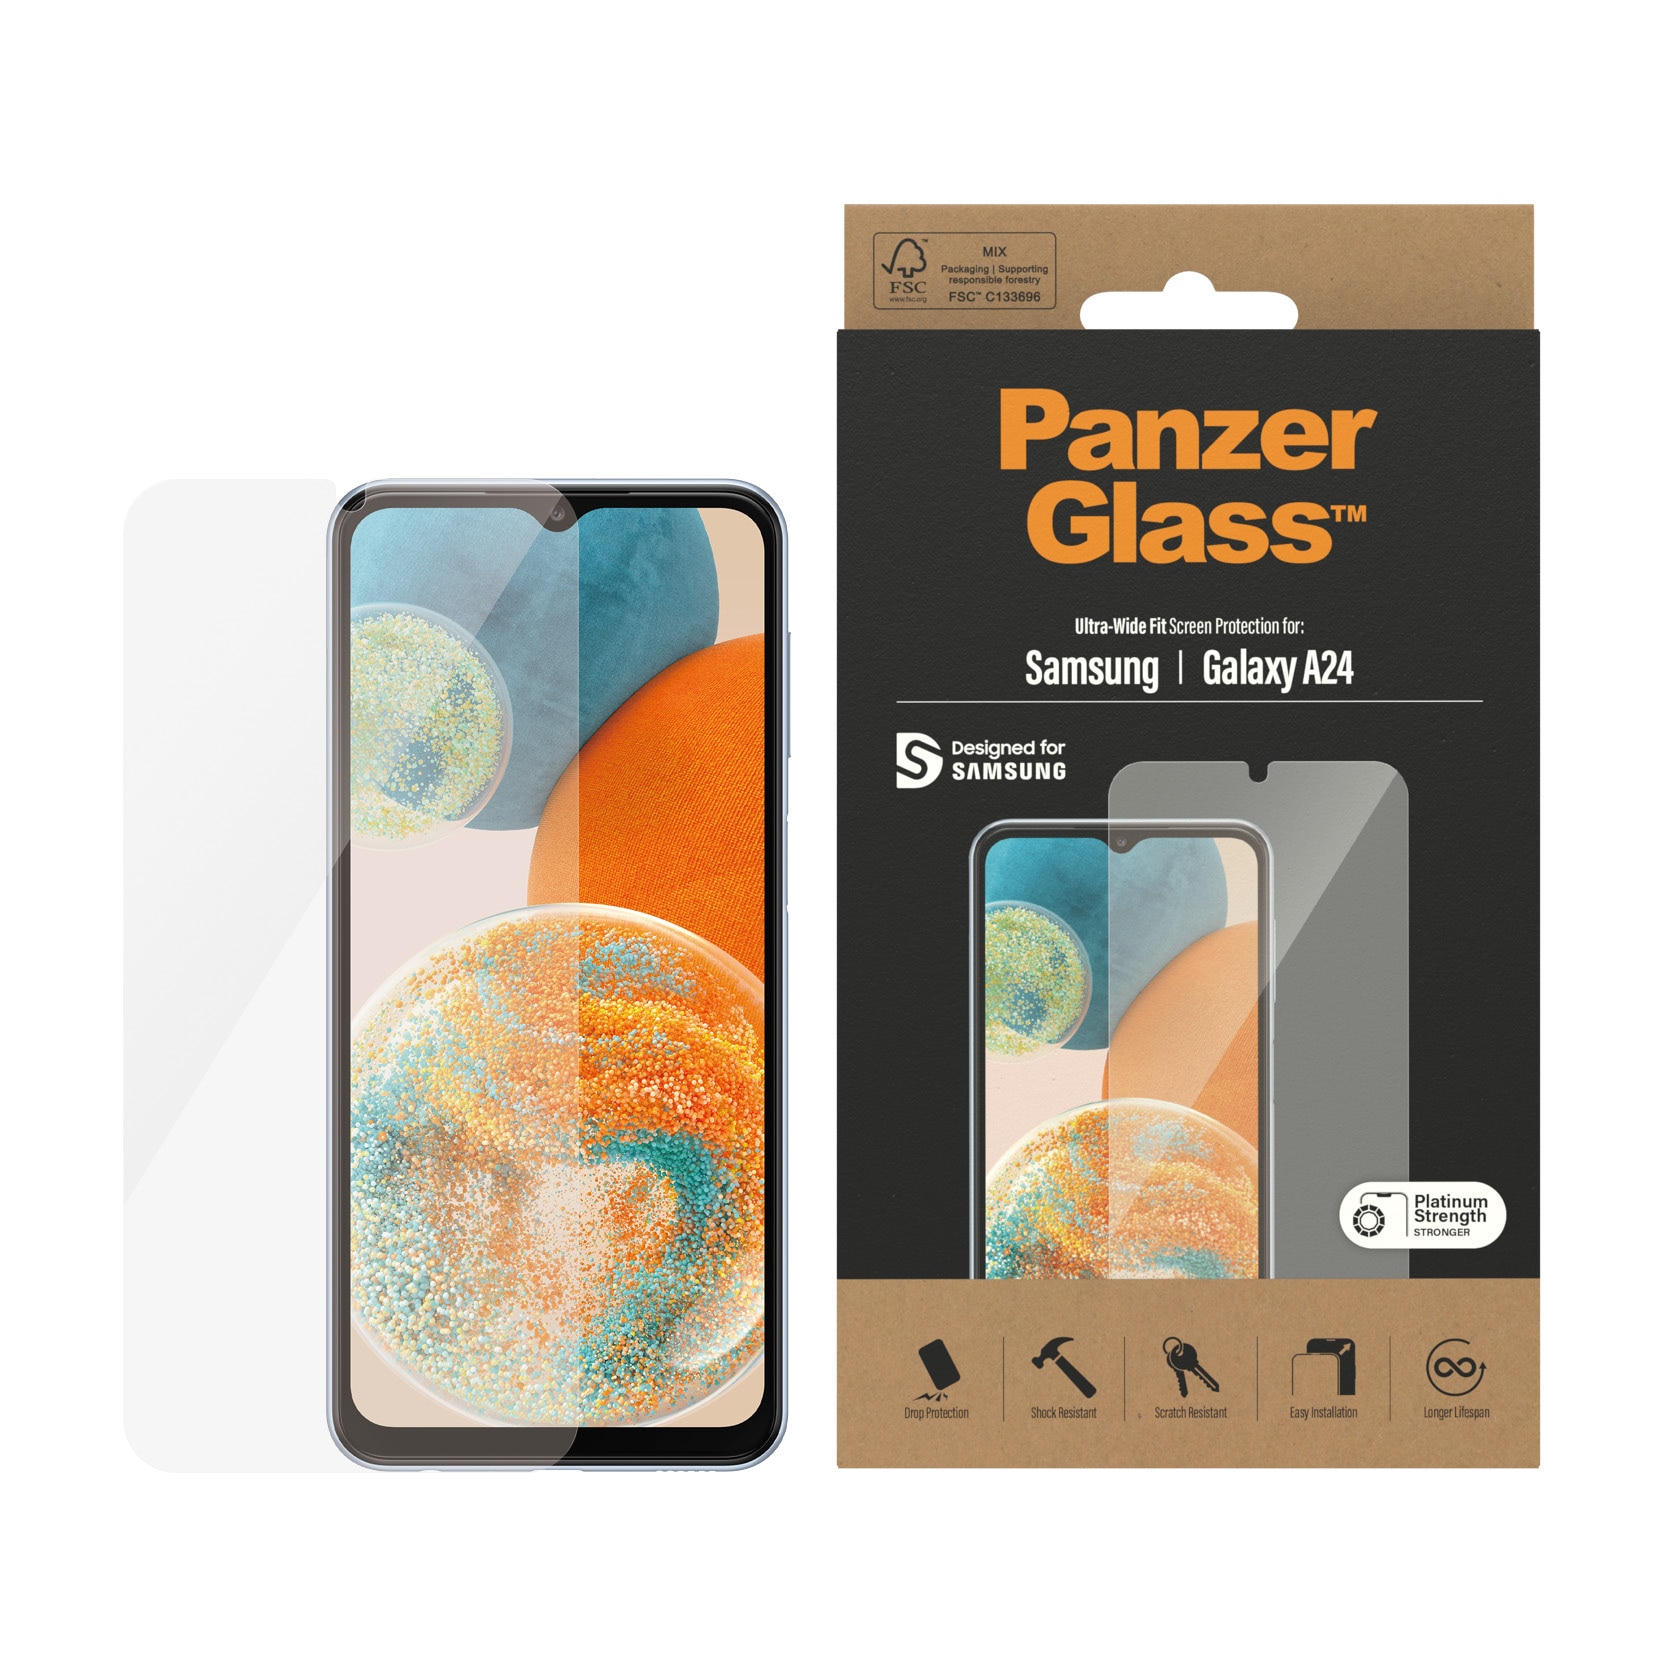 Samsung Galaxy A24 Screen Protector/Skærmbeskyttelse Ultra Wide Fit